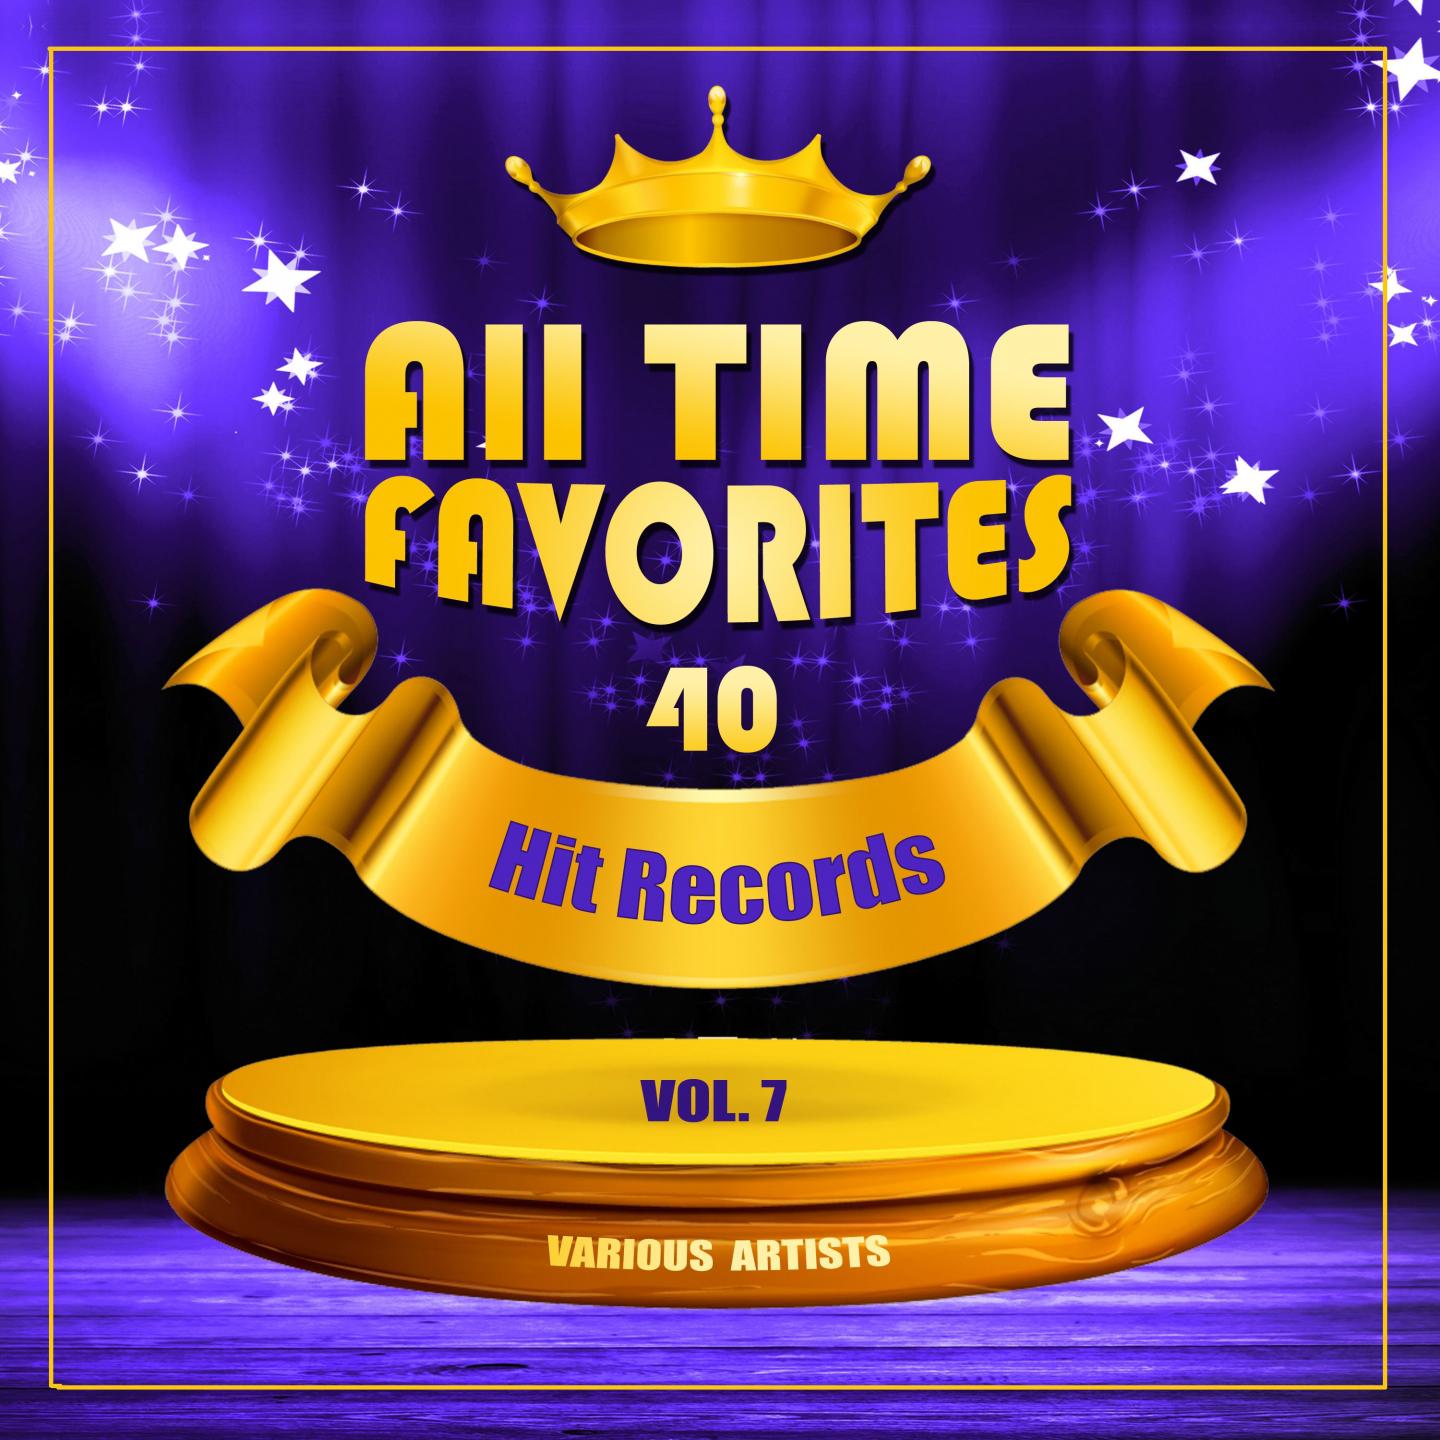 All Time Favorites (40 Hit Records), Vol. 7